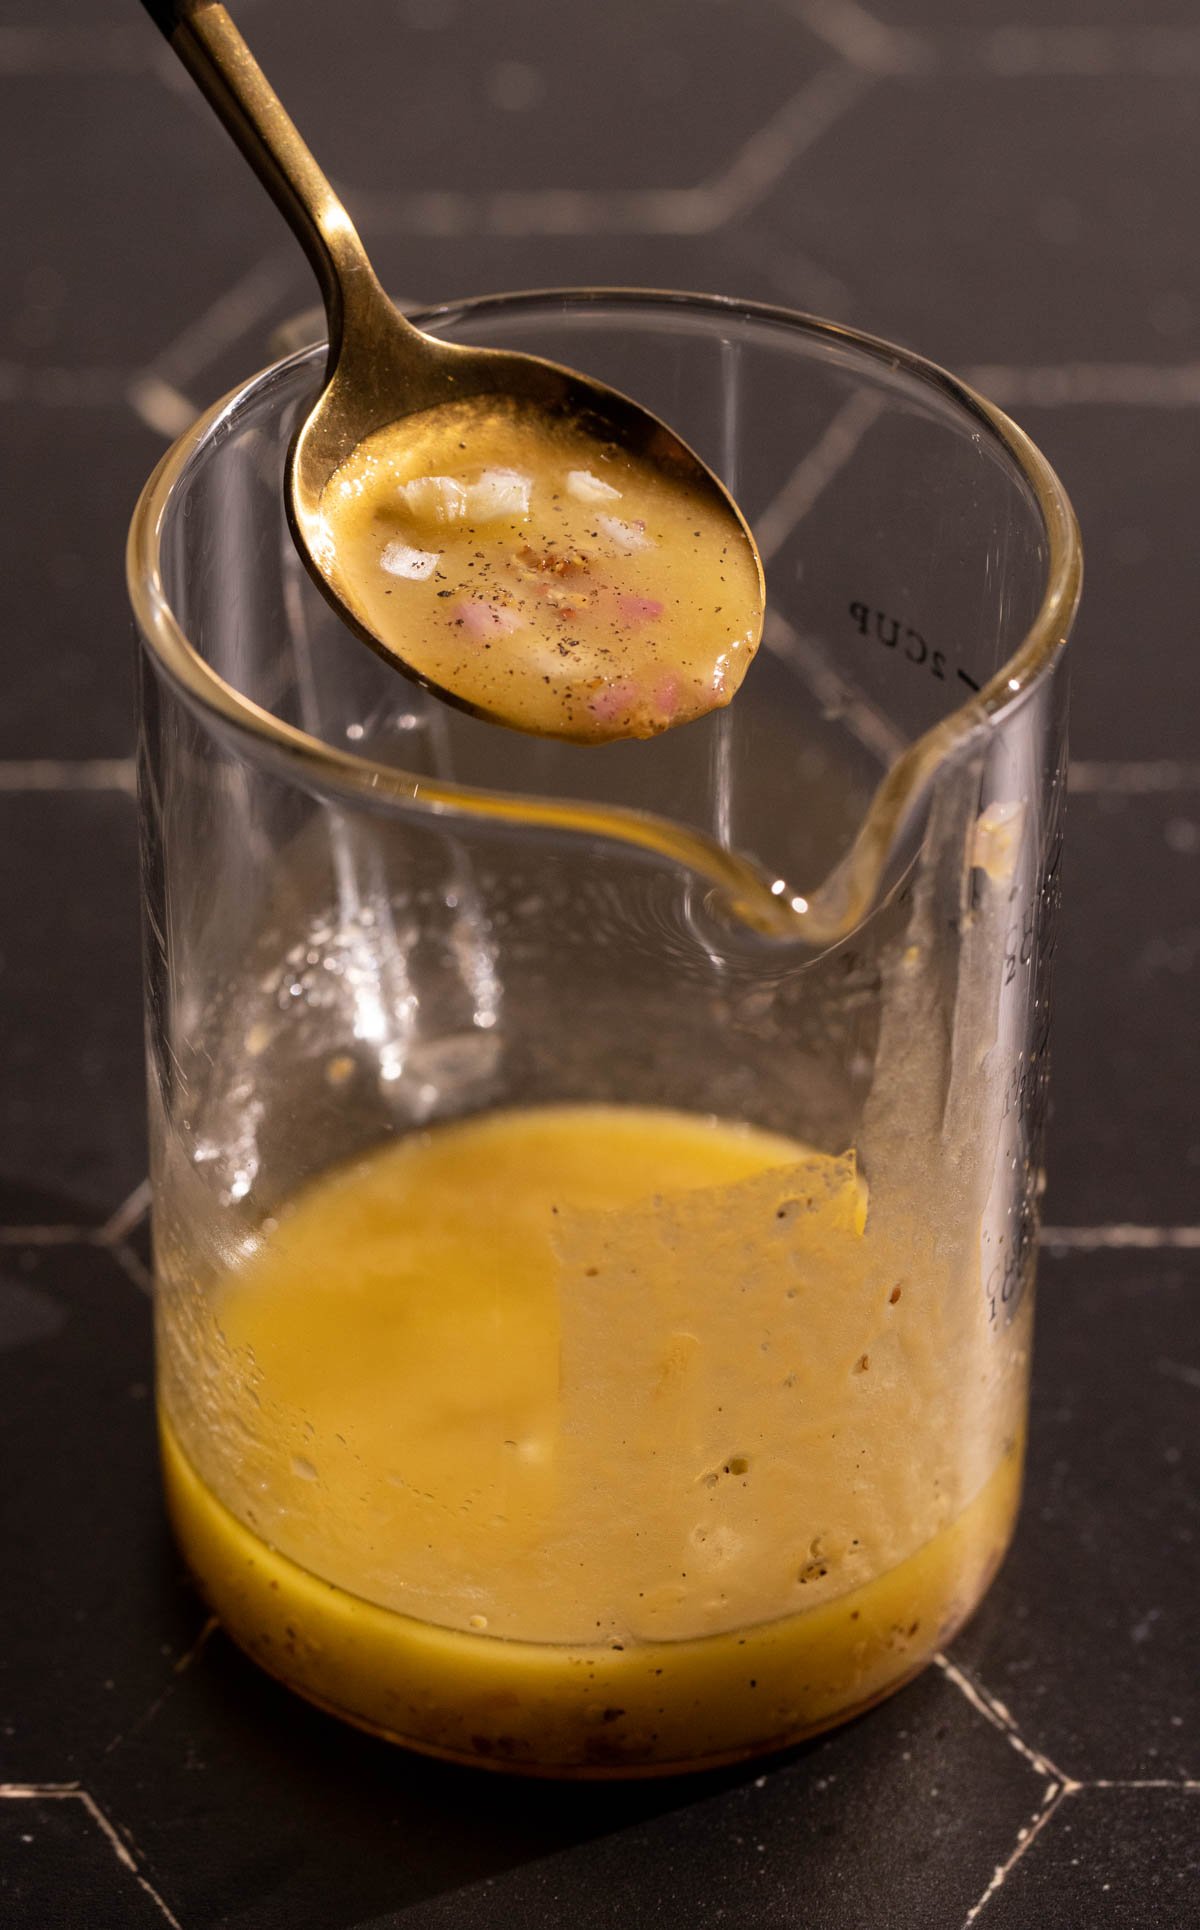 A spoon over a glass cup of apple cider vinegar dressing